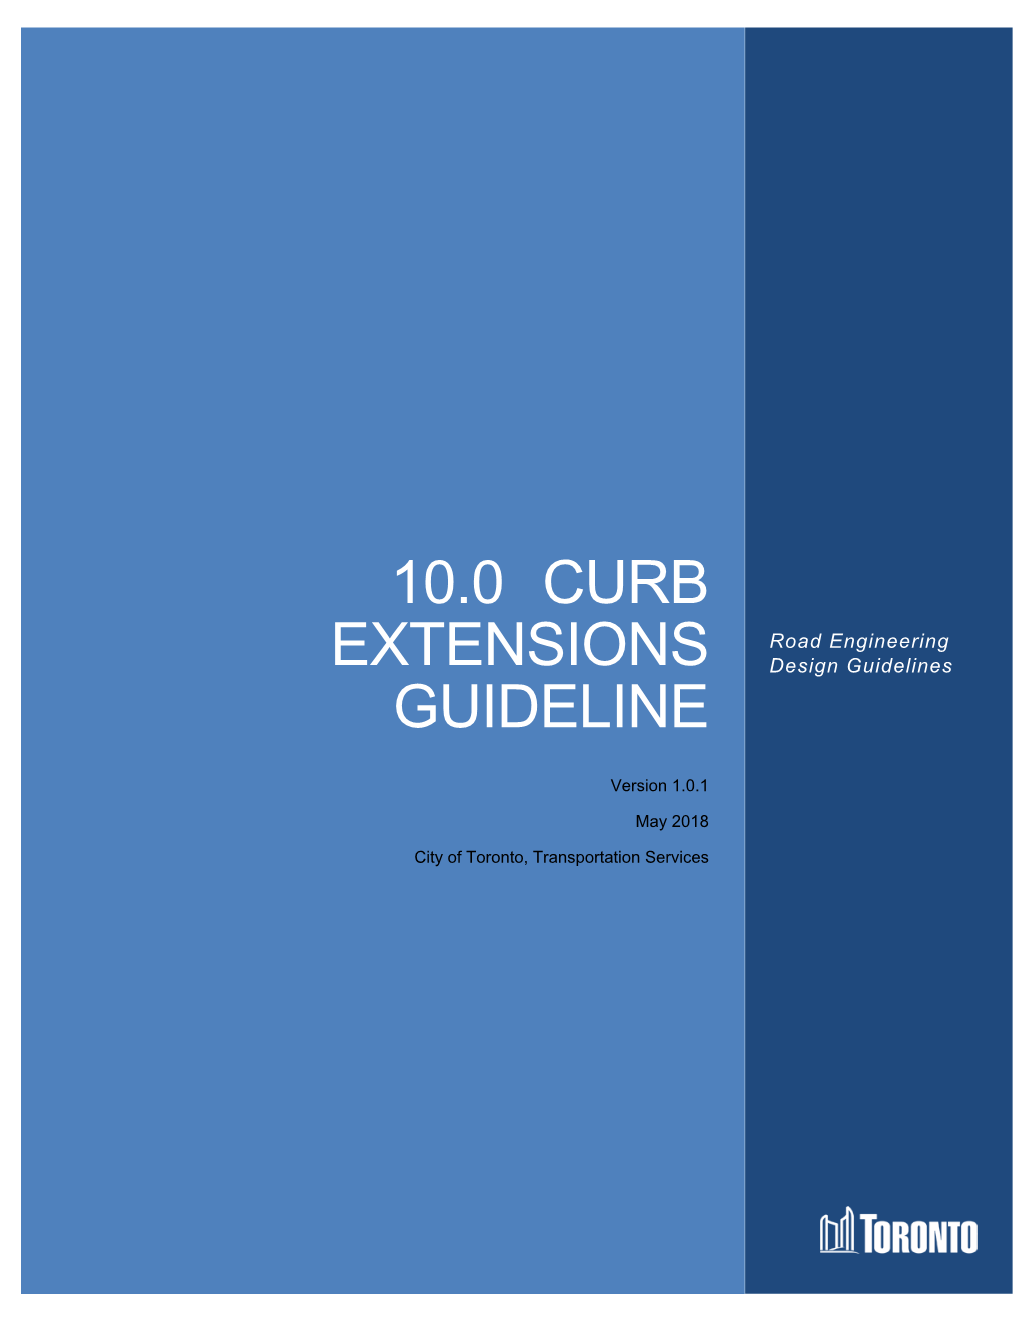 Curb Extension Guidelines – Version 1.0.1, May 2018